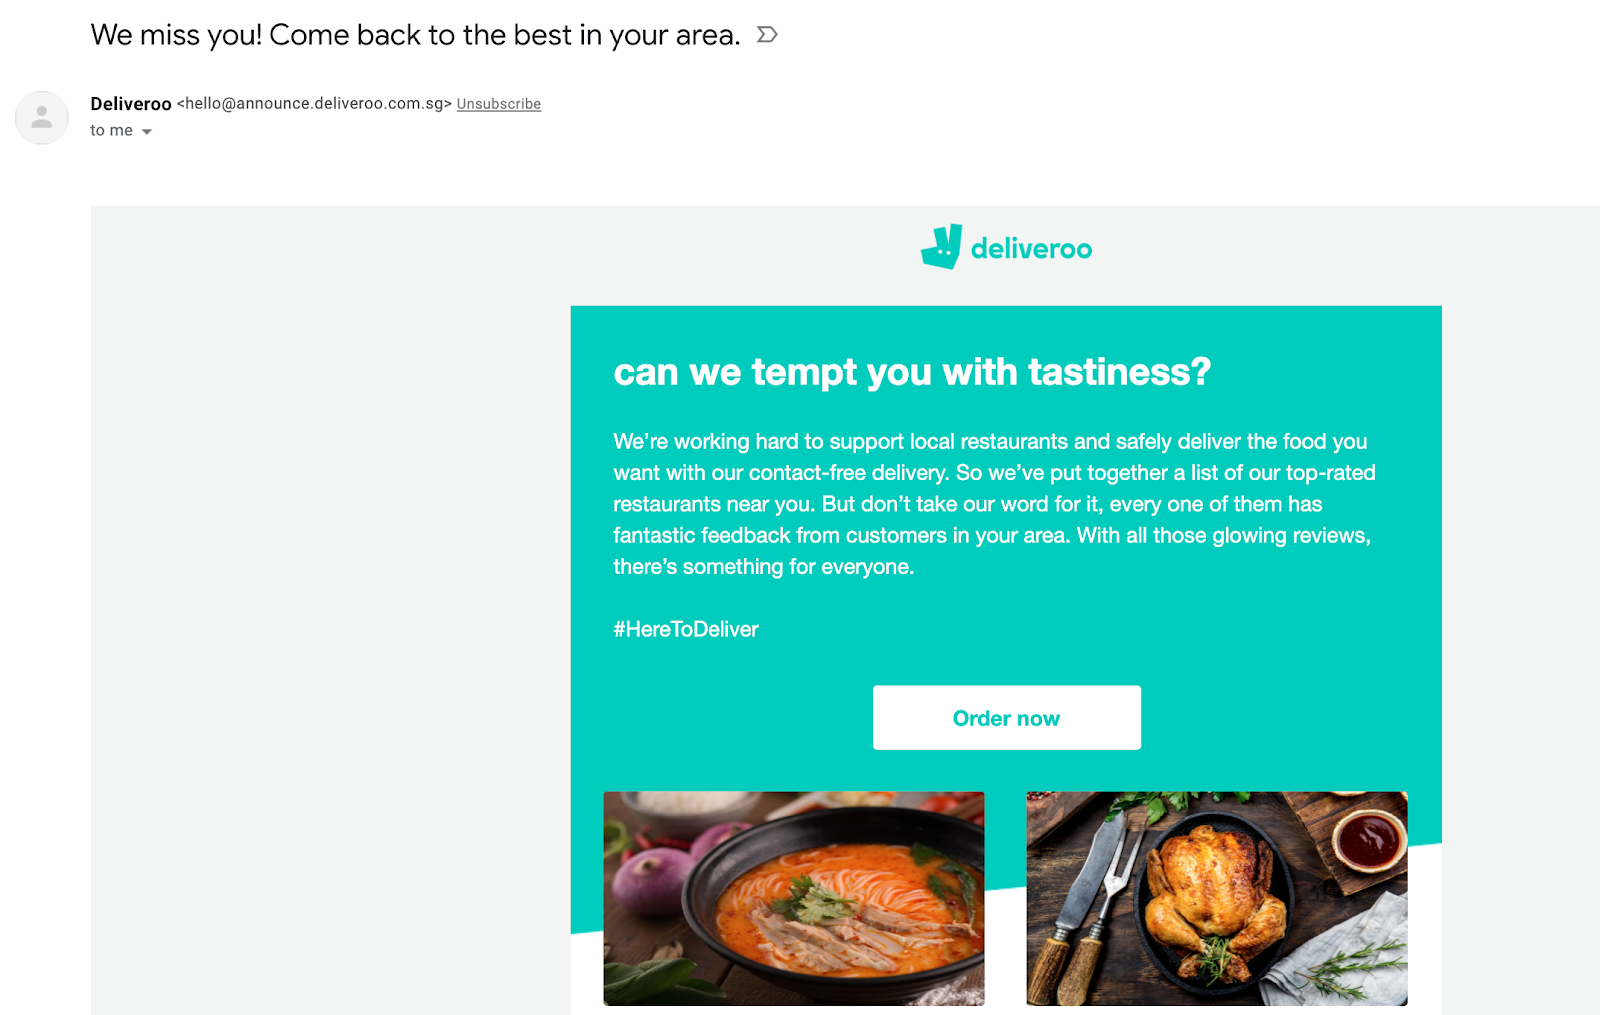 Email marketing campaign example by Deliveroo